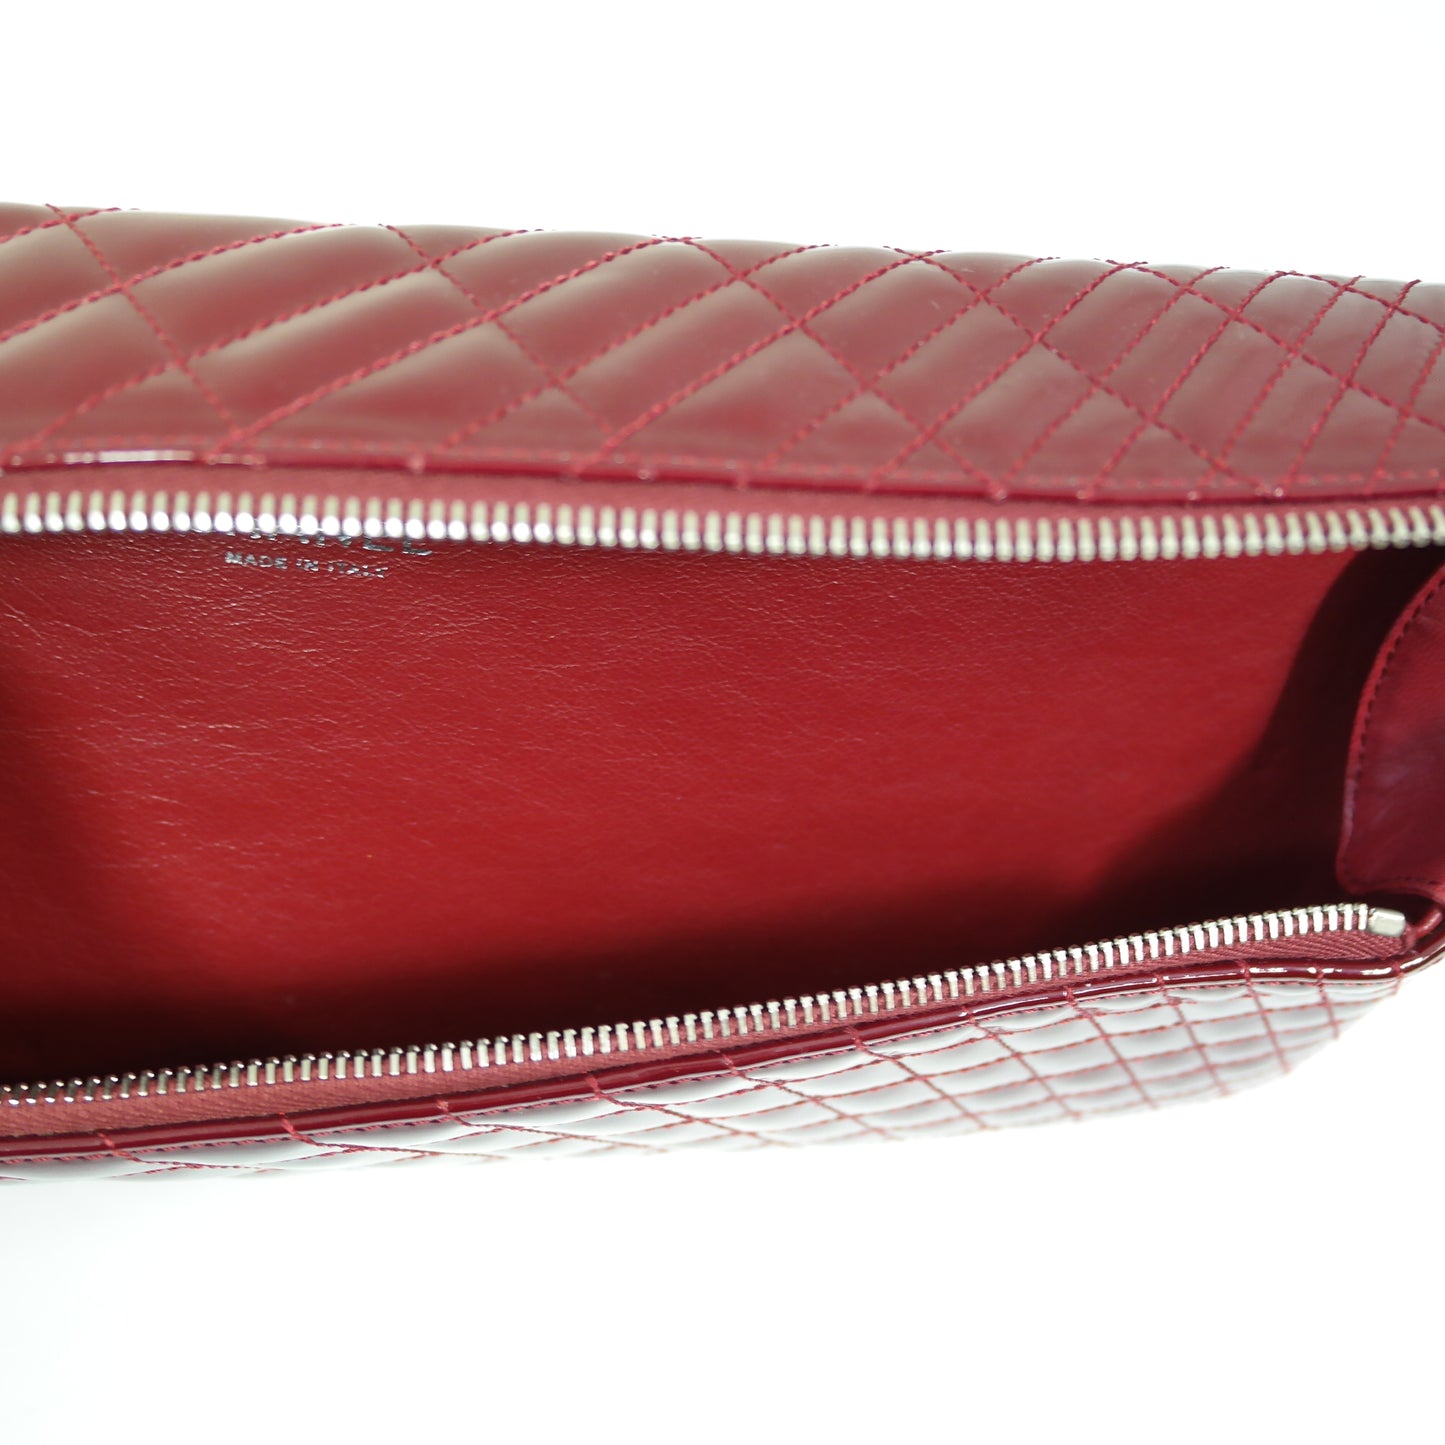 CHANEL Red Patent Calfskin Geometric Quilted Large Kaleidoscope Clutch Bag